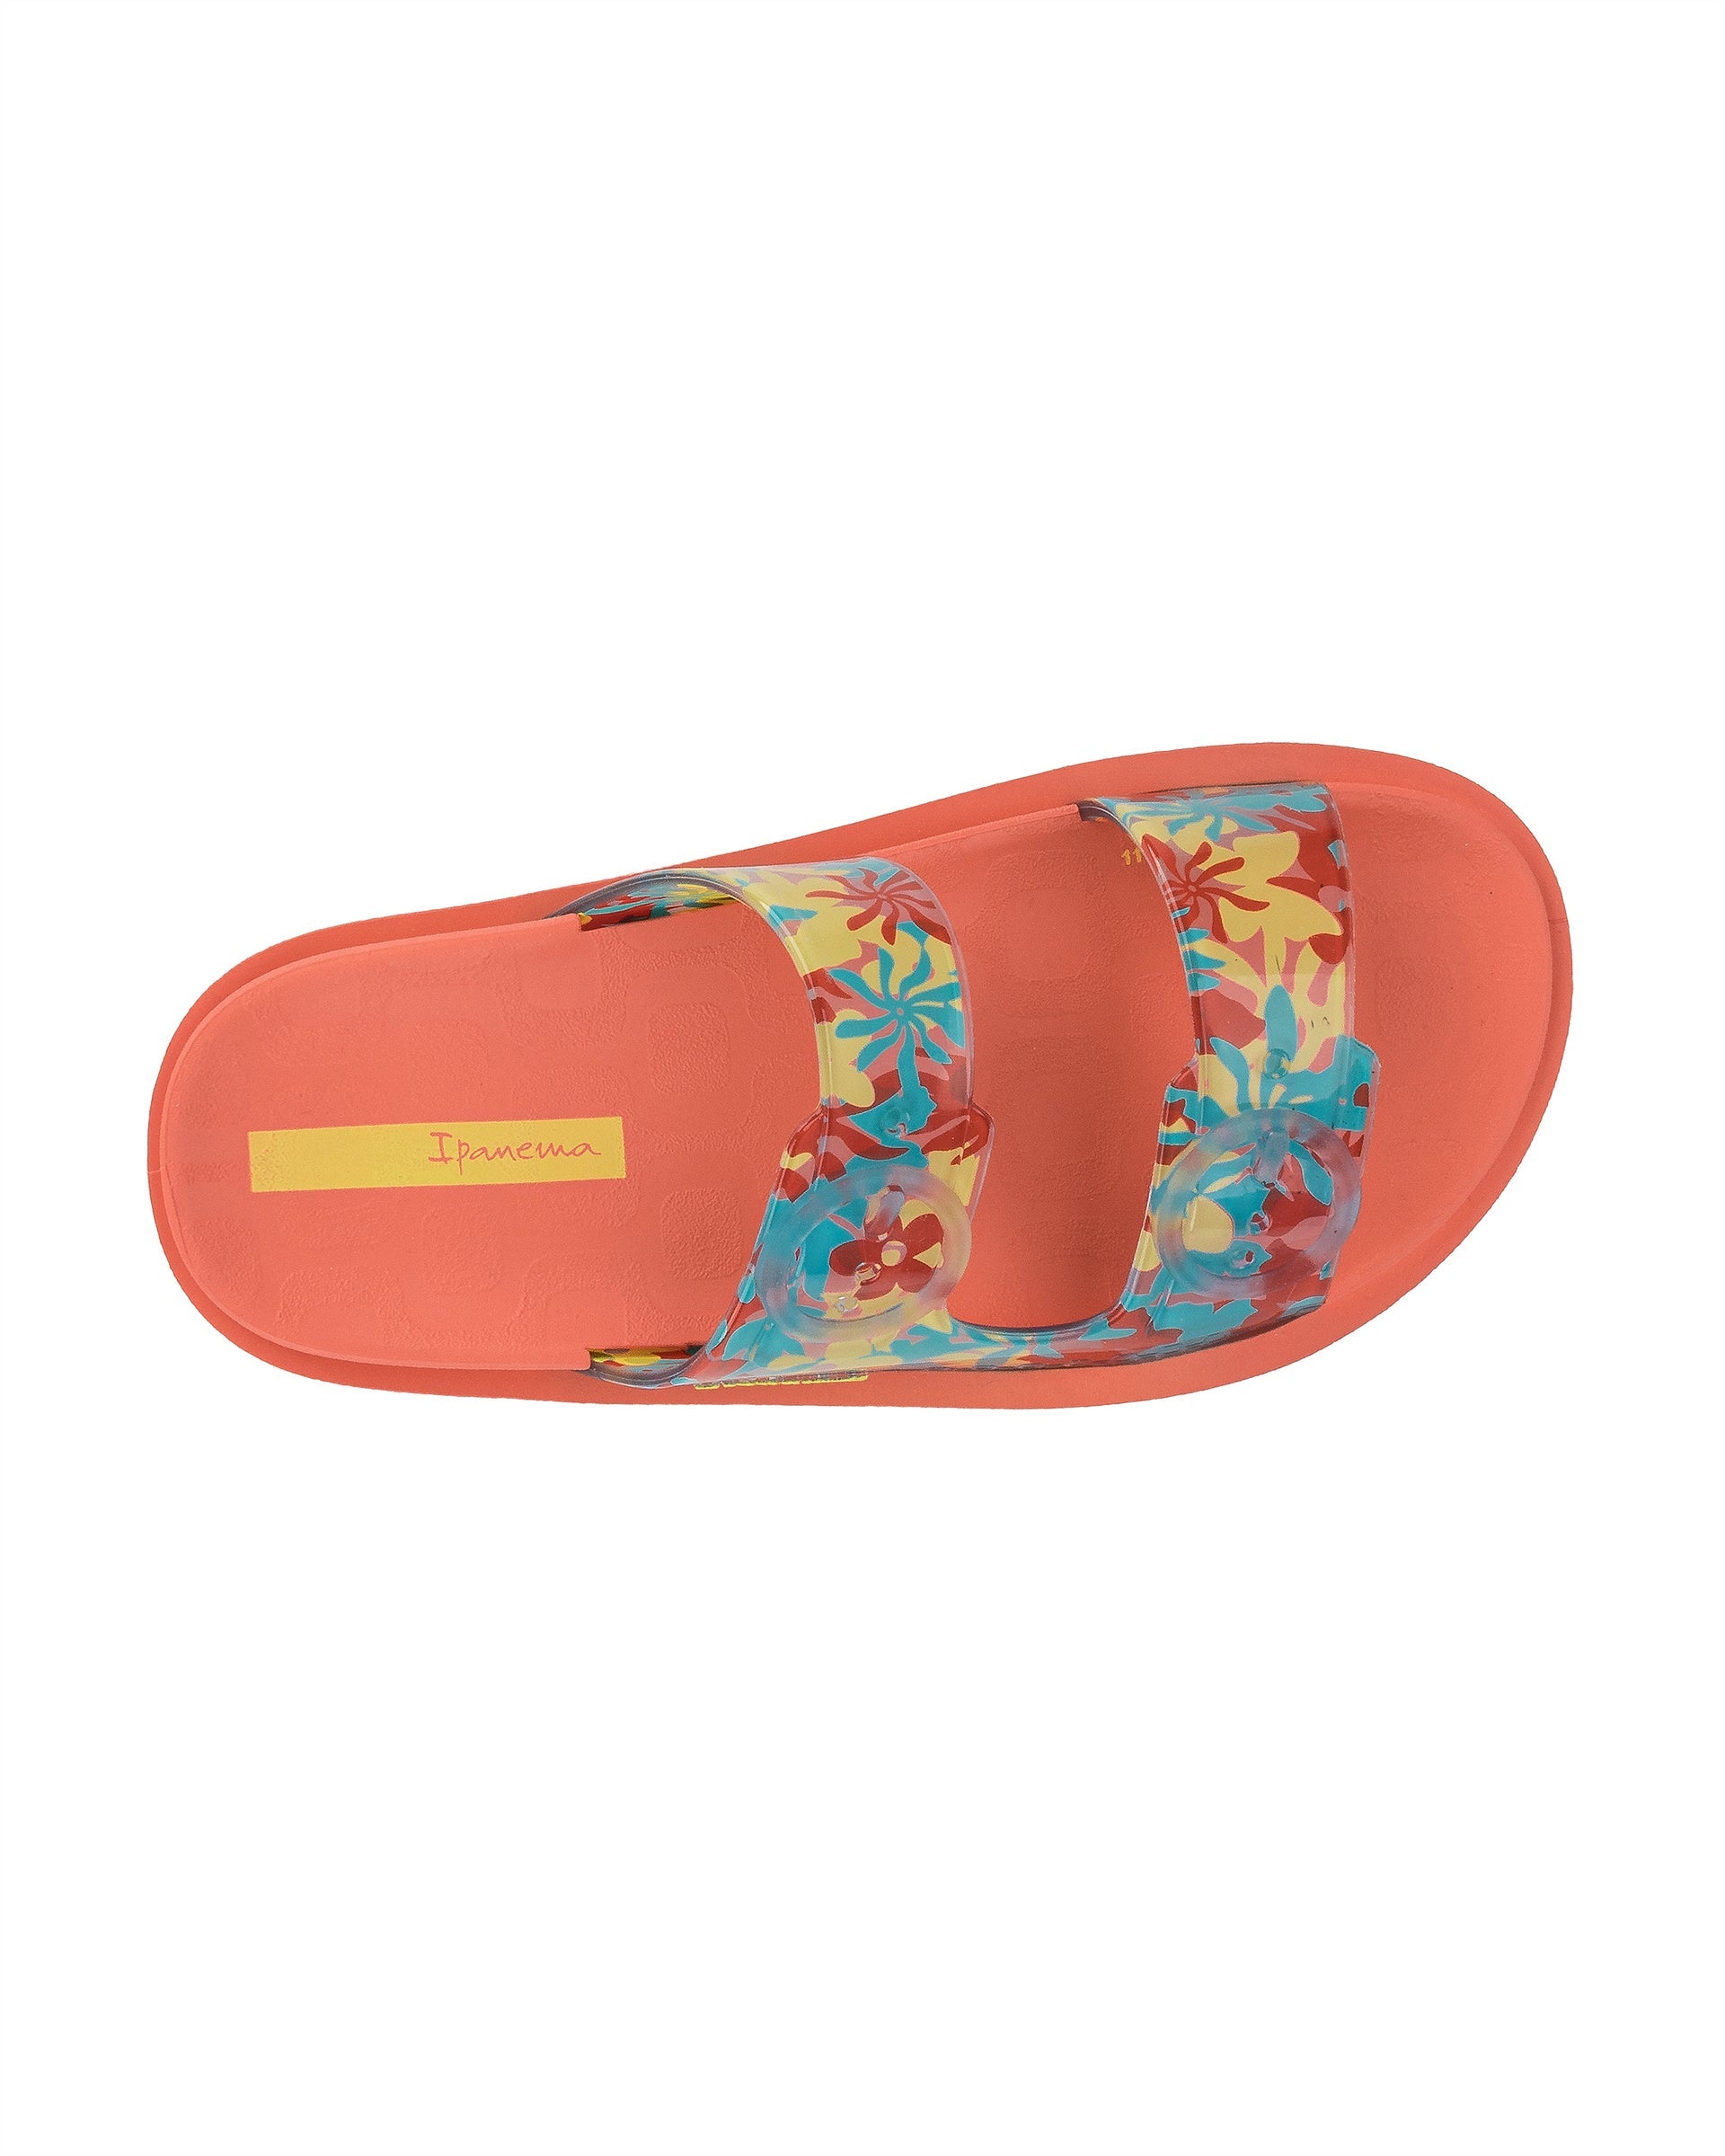 Top view of a orange Ipanema Follow kids slide with floral print on the upper.